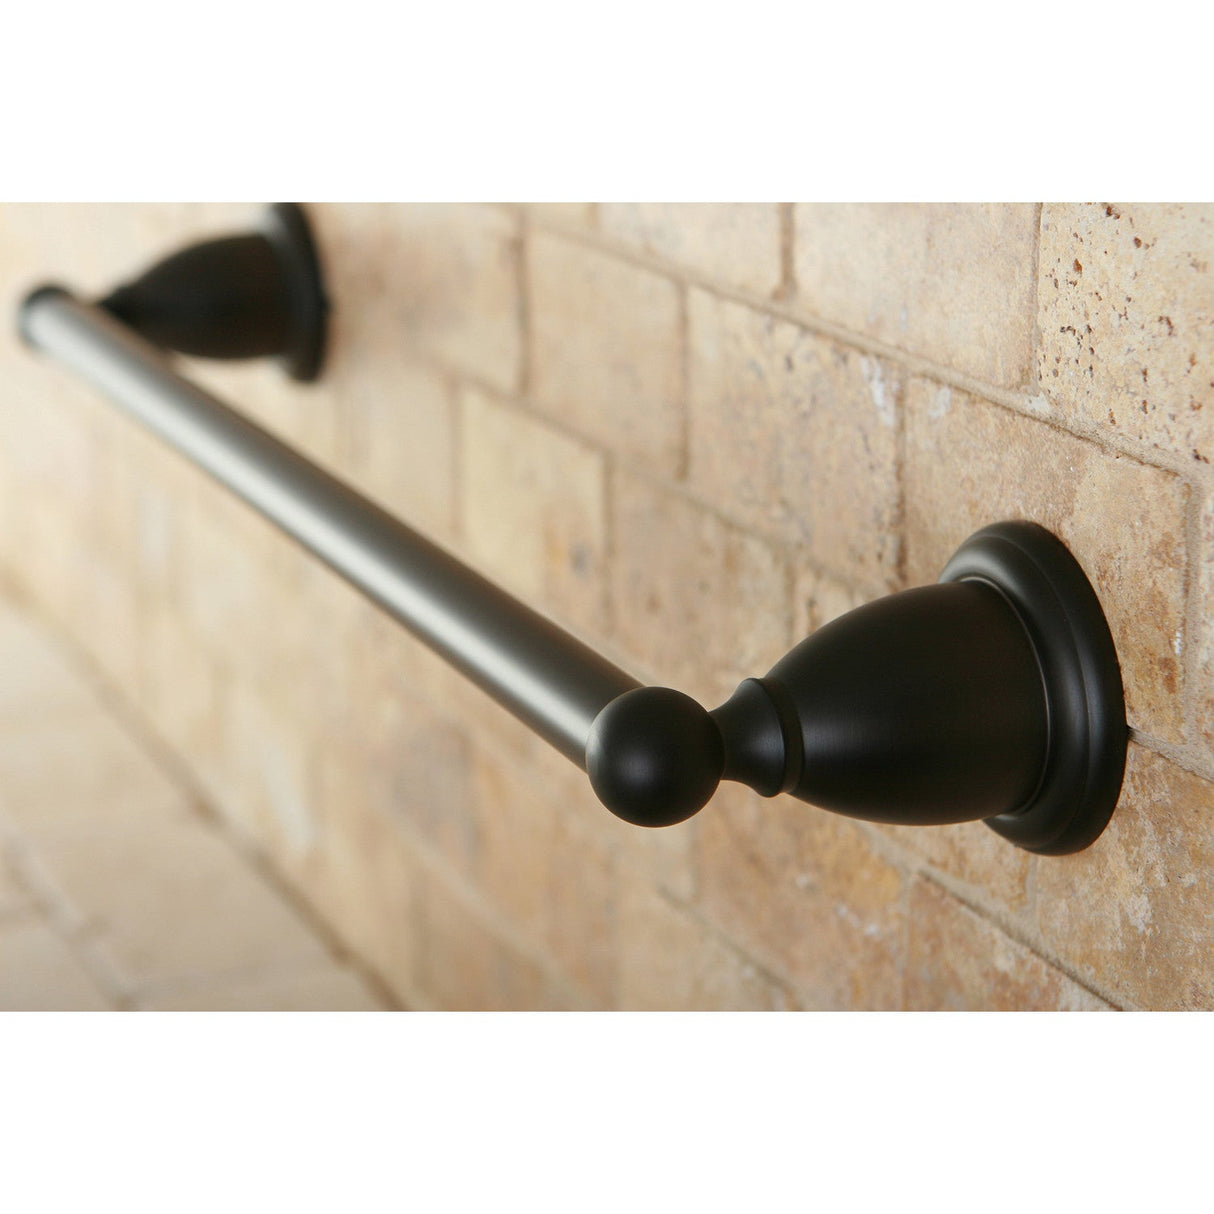 Heritage BA1752ORB 18-Inch Towel Bar, Oil Rubbed Bronze